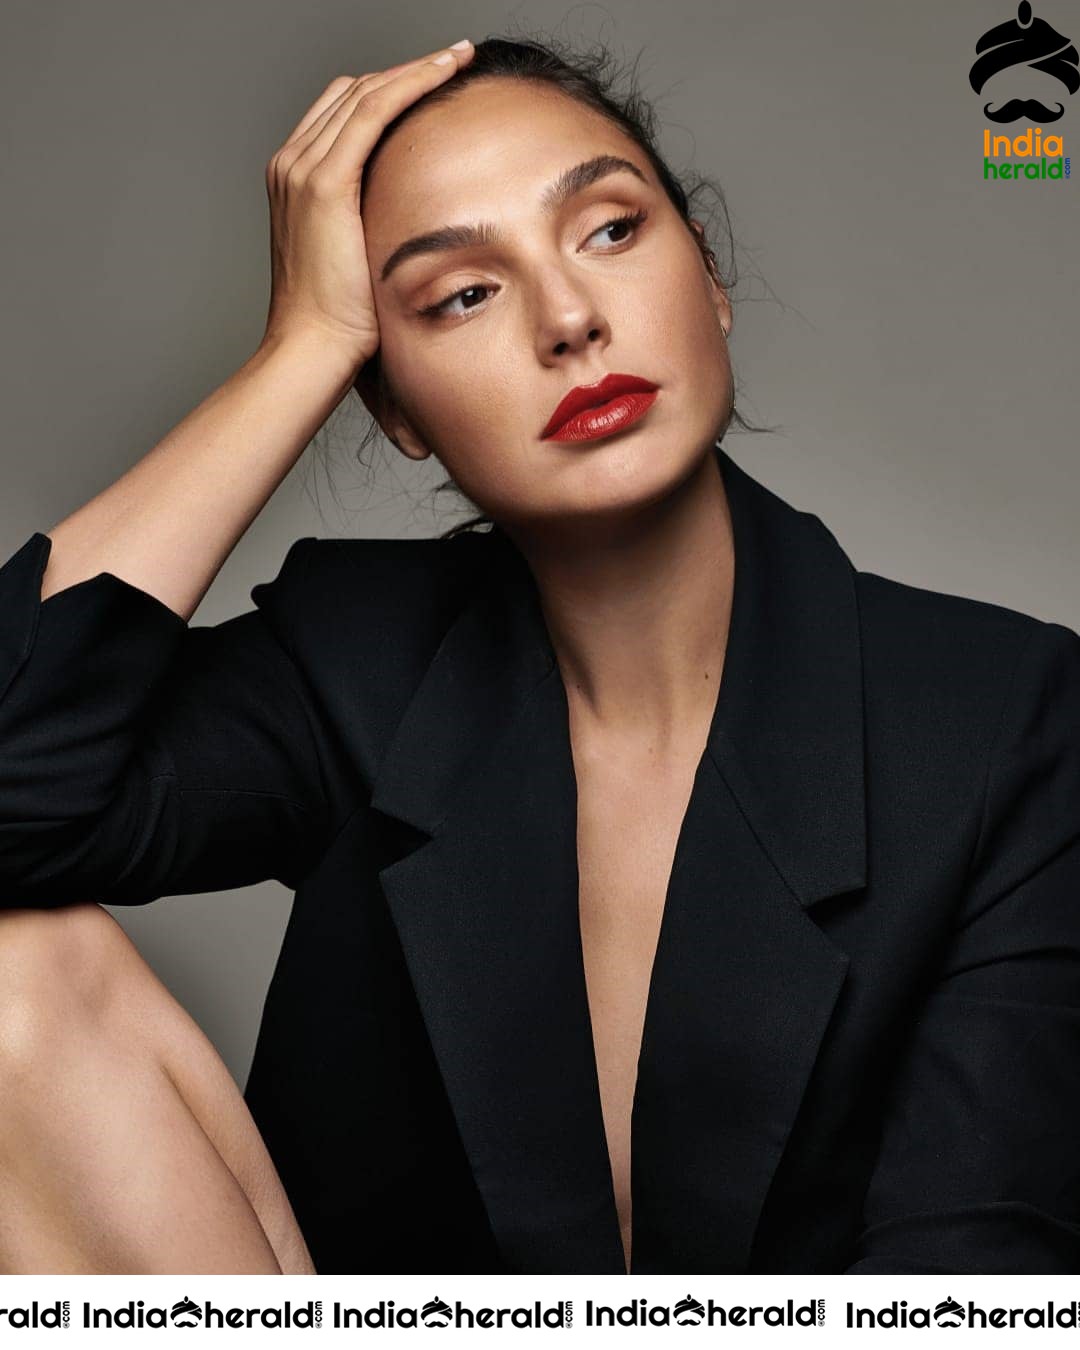 Gal Gadot Latest Insta Photos Where She Wears A Bright Red Lipstick